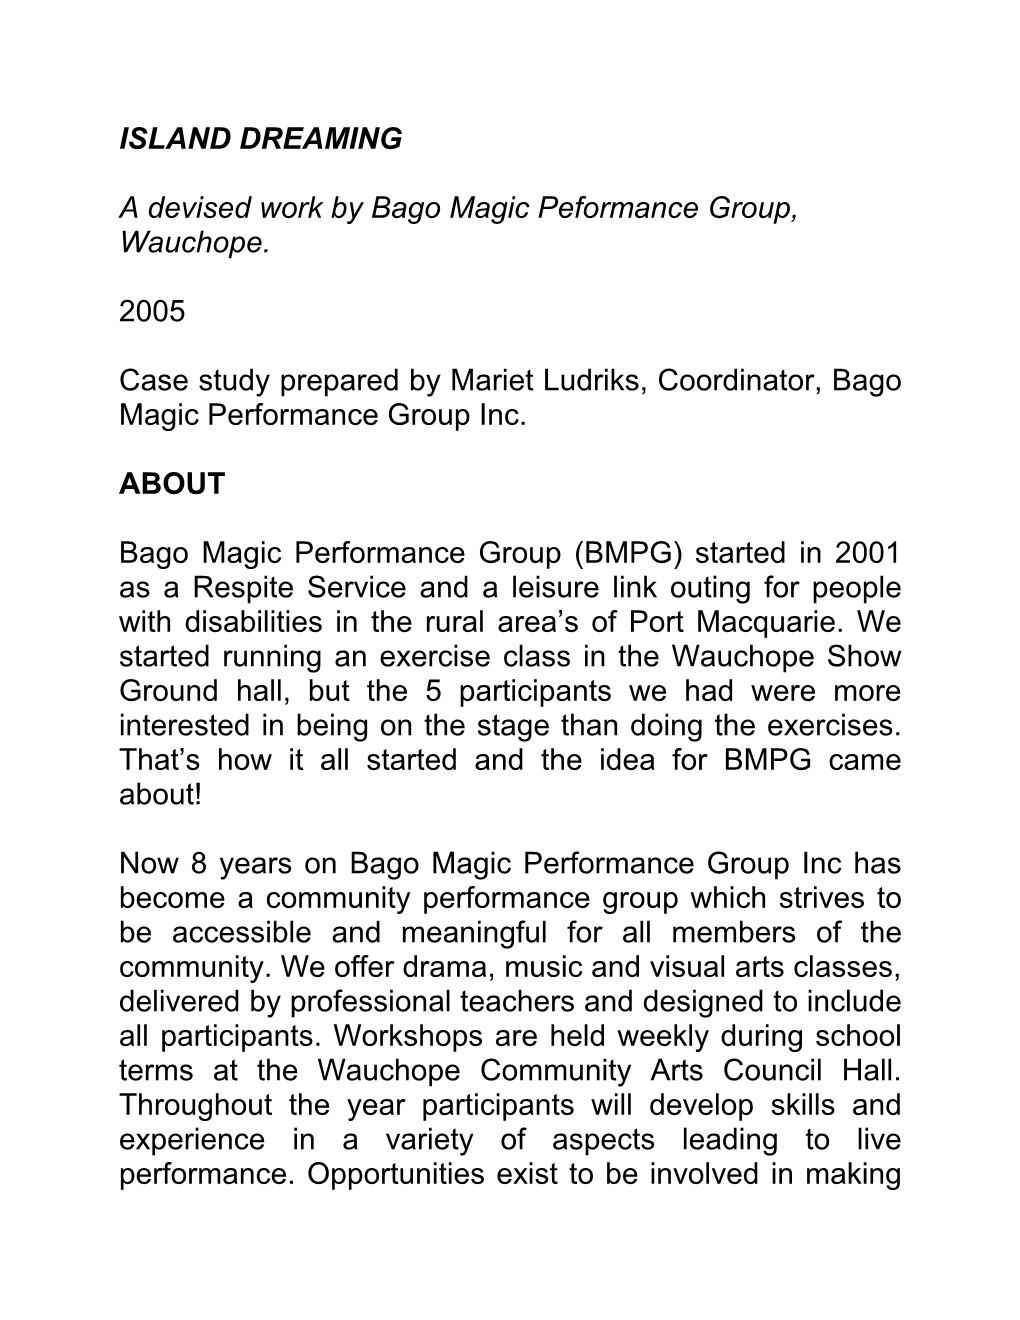 A Devised Work by Bago Magic Peformance Group, Wauchope